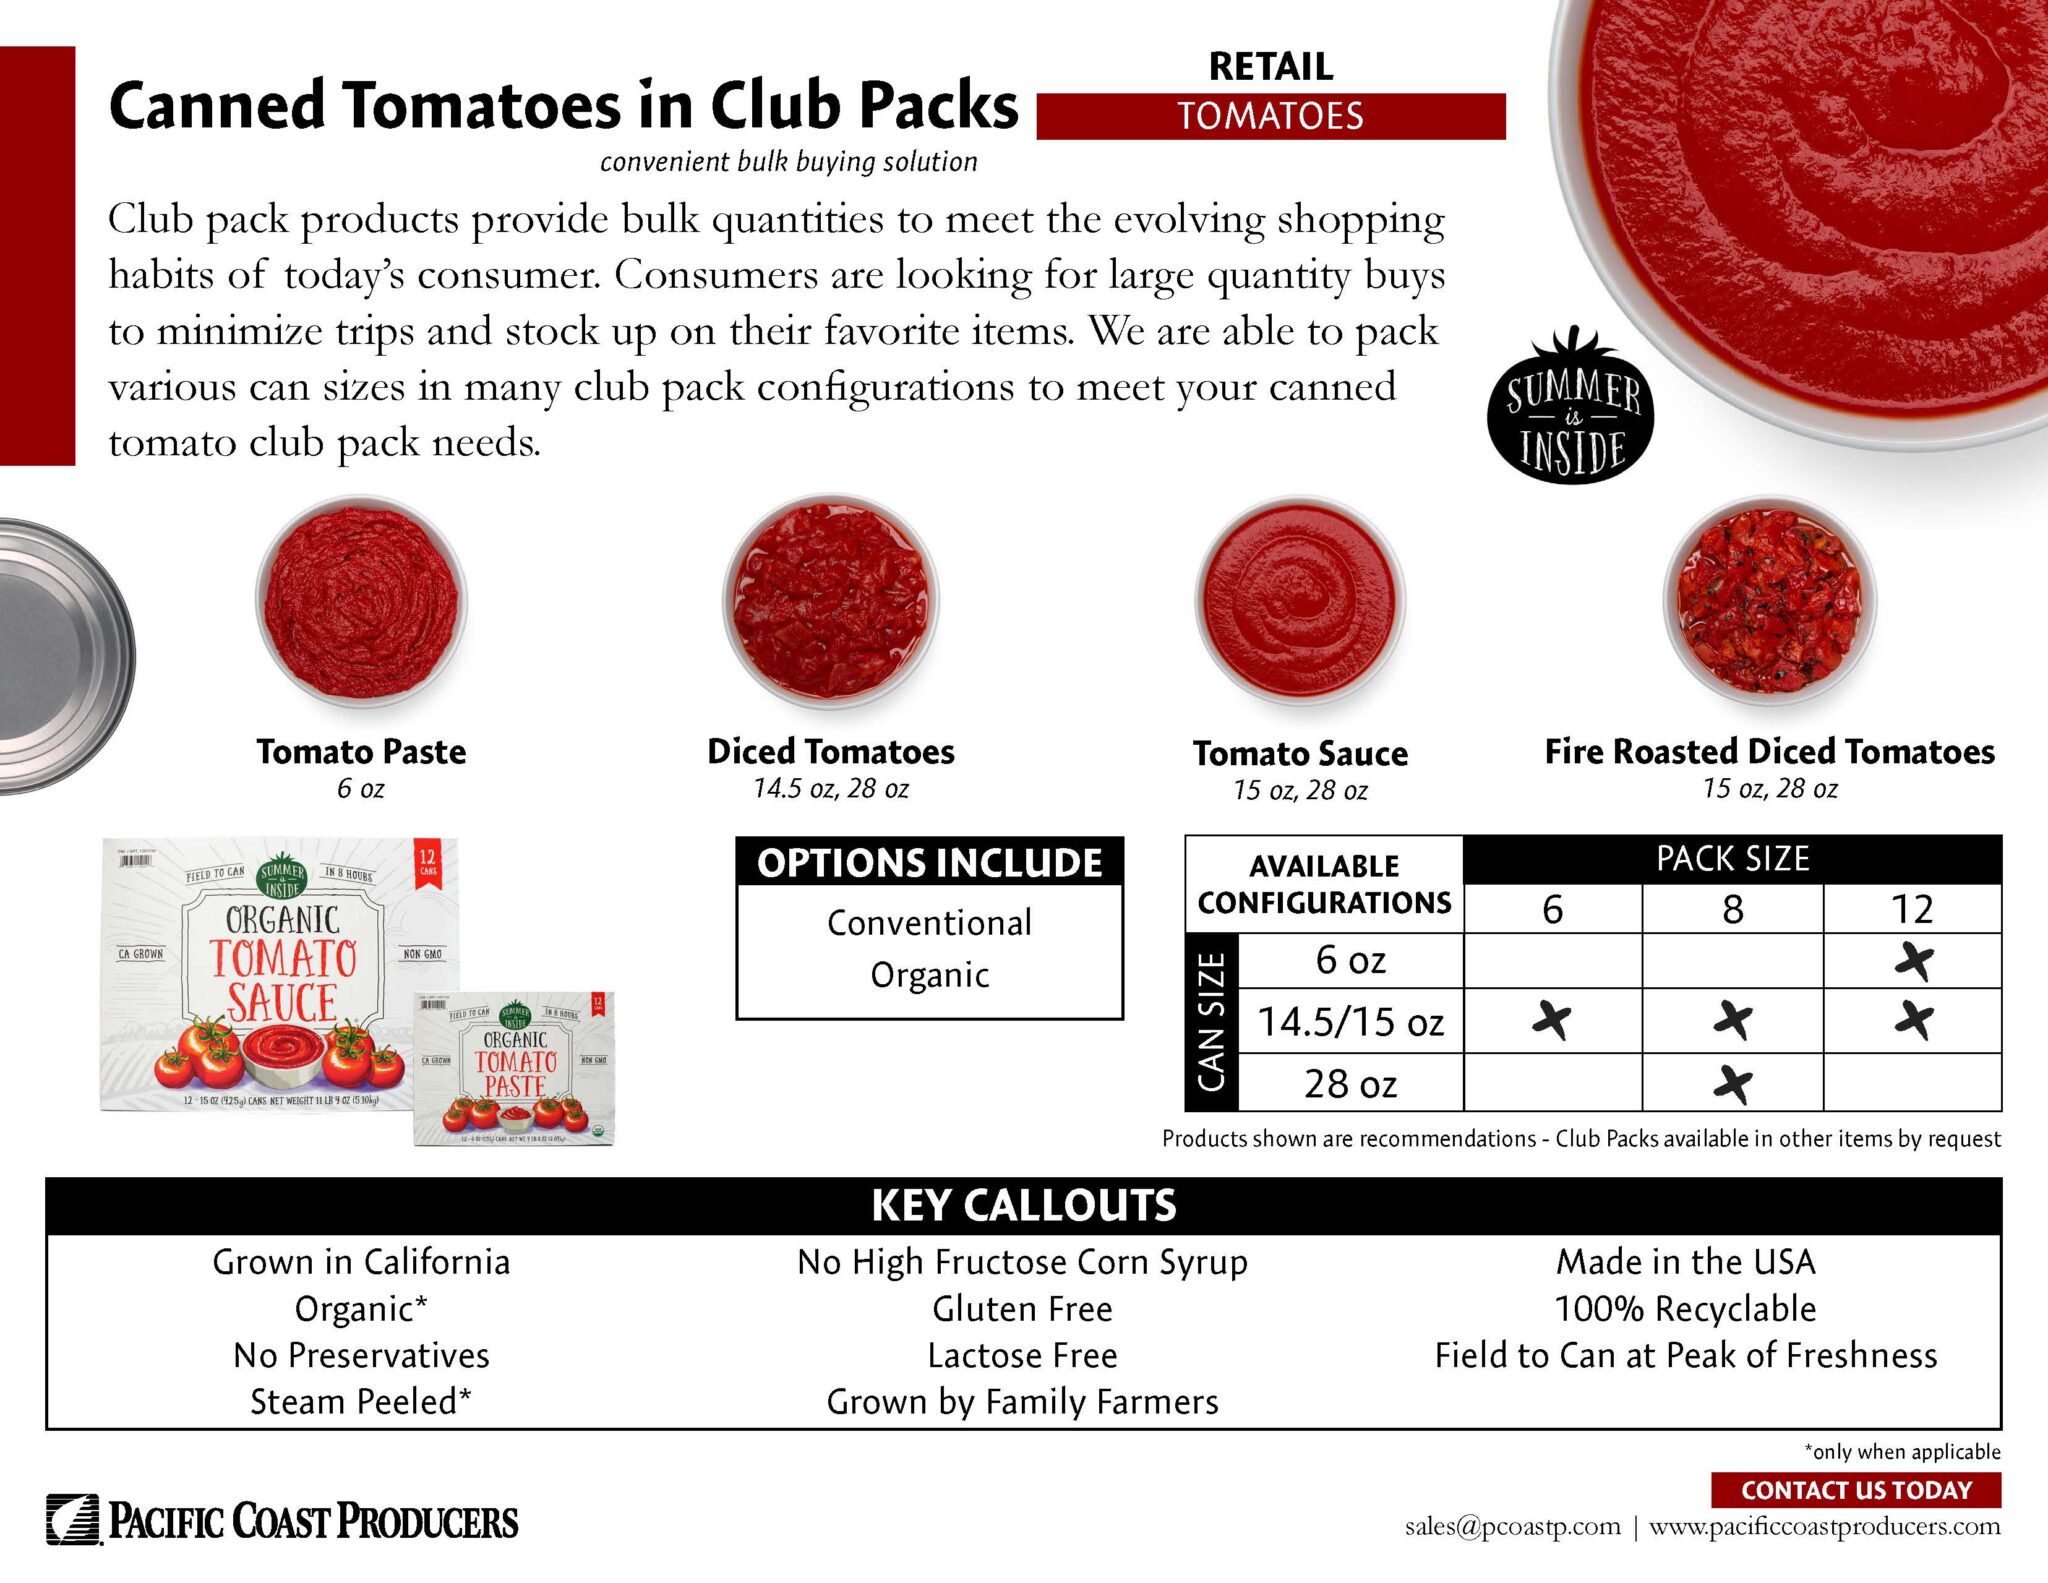 The retail club pack containing canned tomatoes ingredients.